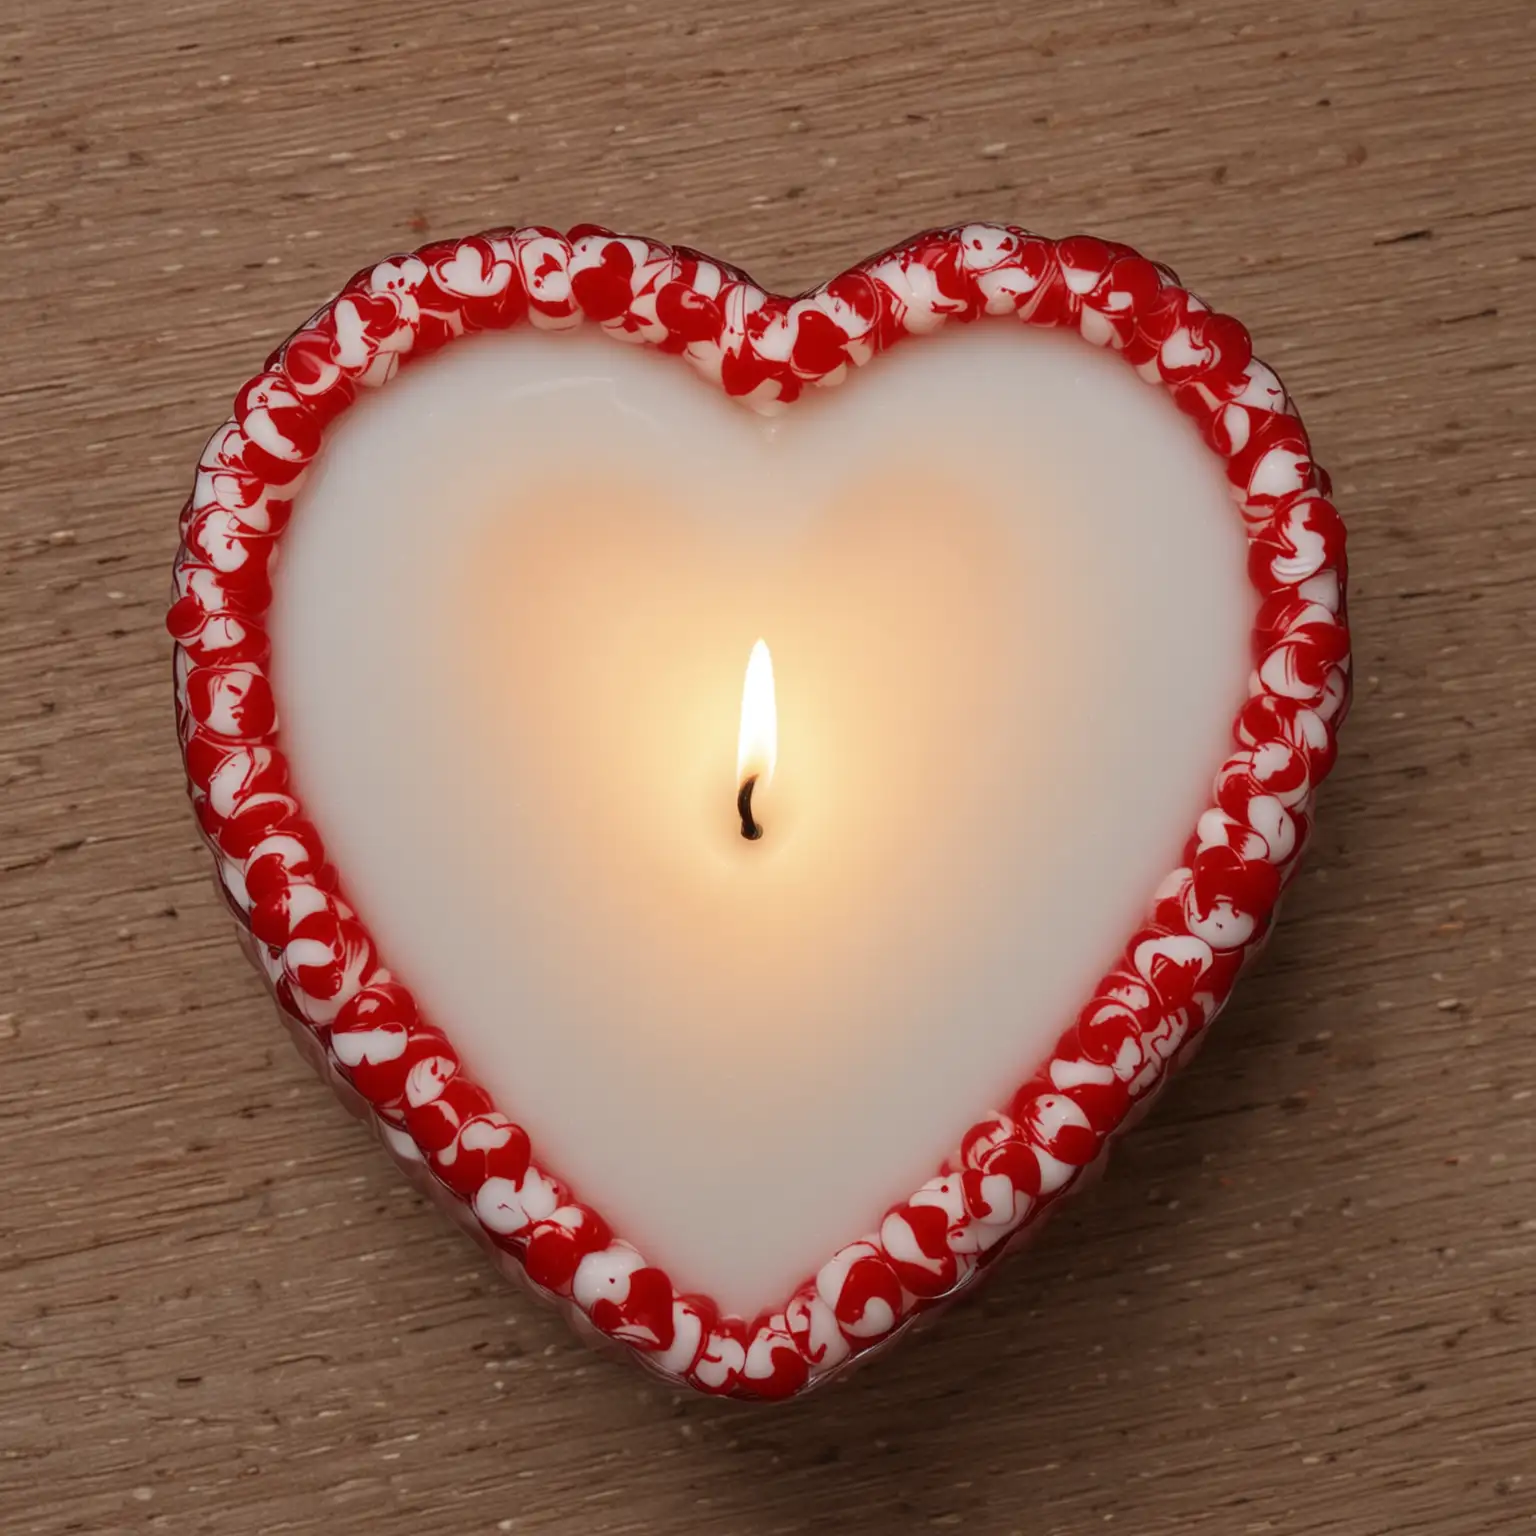 Romantic Red and White Candle Heart Symbol of Love and Passion